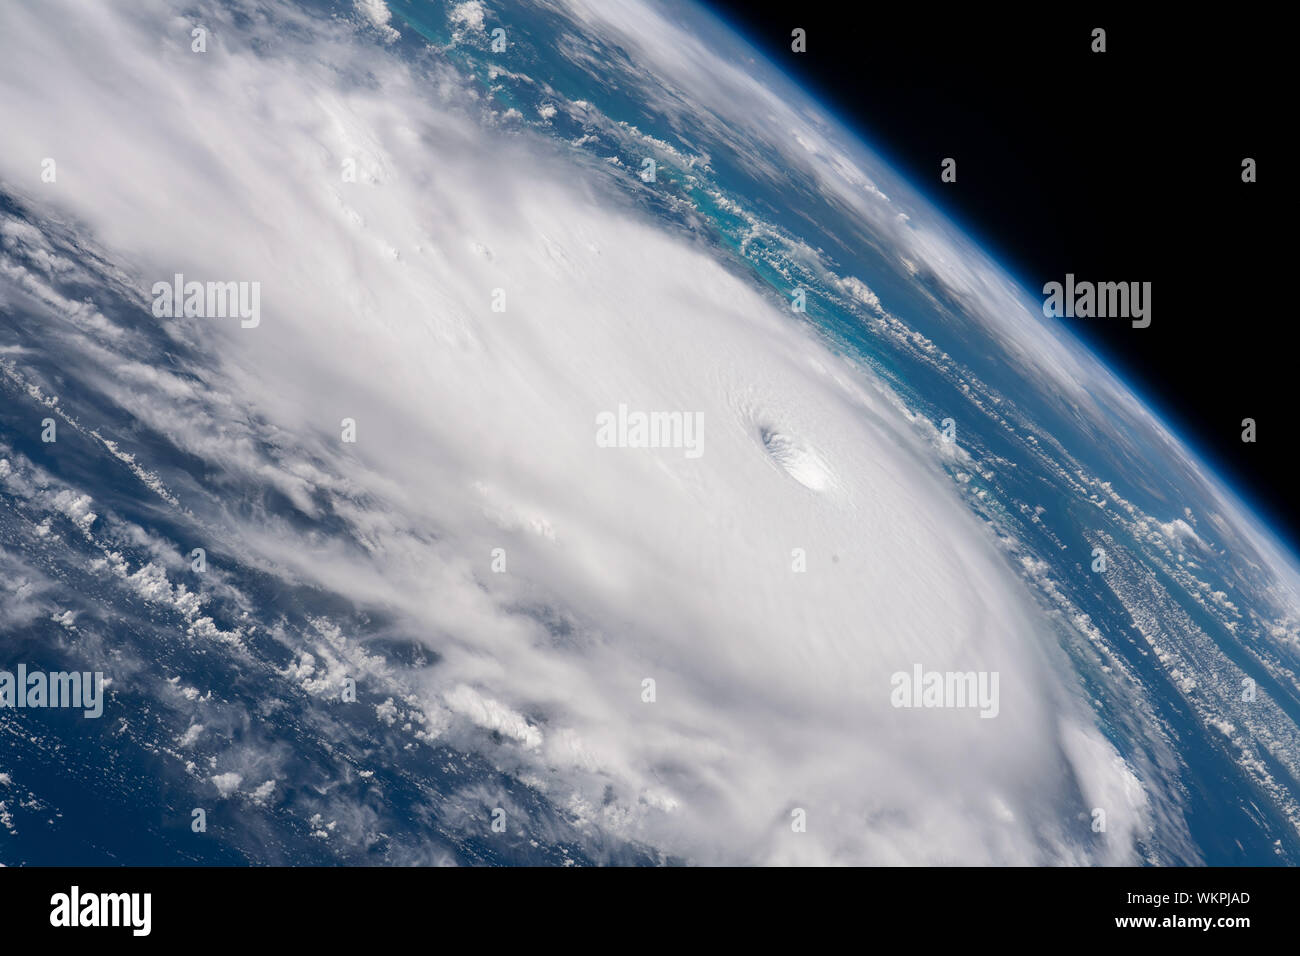 International Space Station. 01 September, 2019. Cyclonic clouds of Hurricane Dorian seen from the International Space Station as it moves toward the coast of Florida September 1, 2019 in the Atlantic Ocean. The current forecast calls for Dorian to strengthen over open water to a Category 4 with winds of 140 mph before making landfall in South Florida late Monday.  Credit: NASA/Planetpix/Alamy Live News Stock Photo